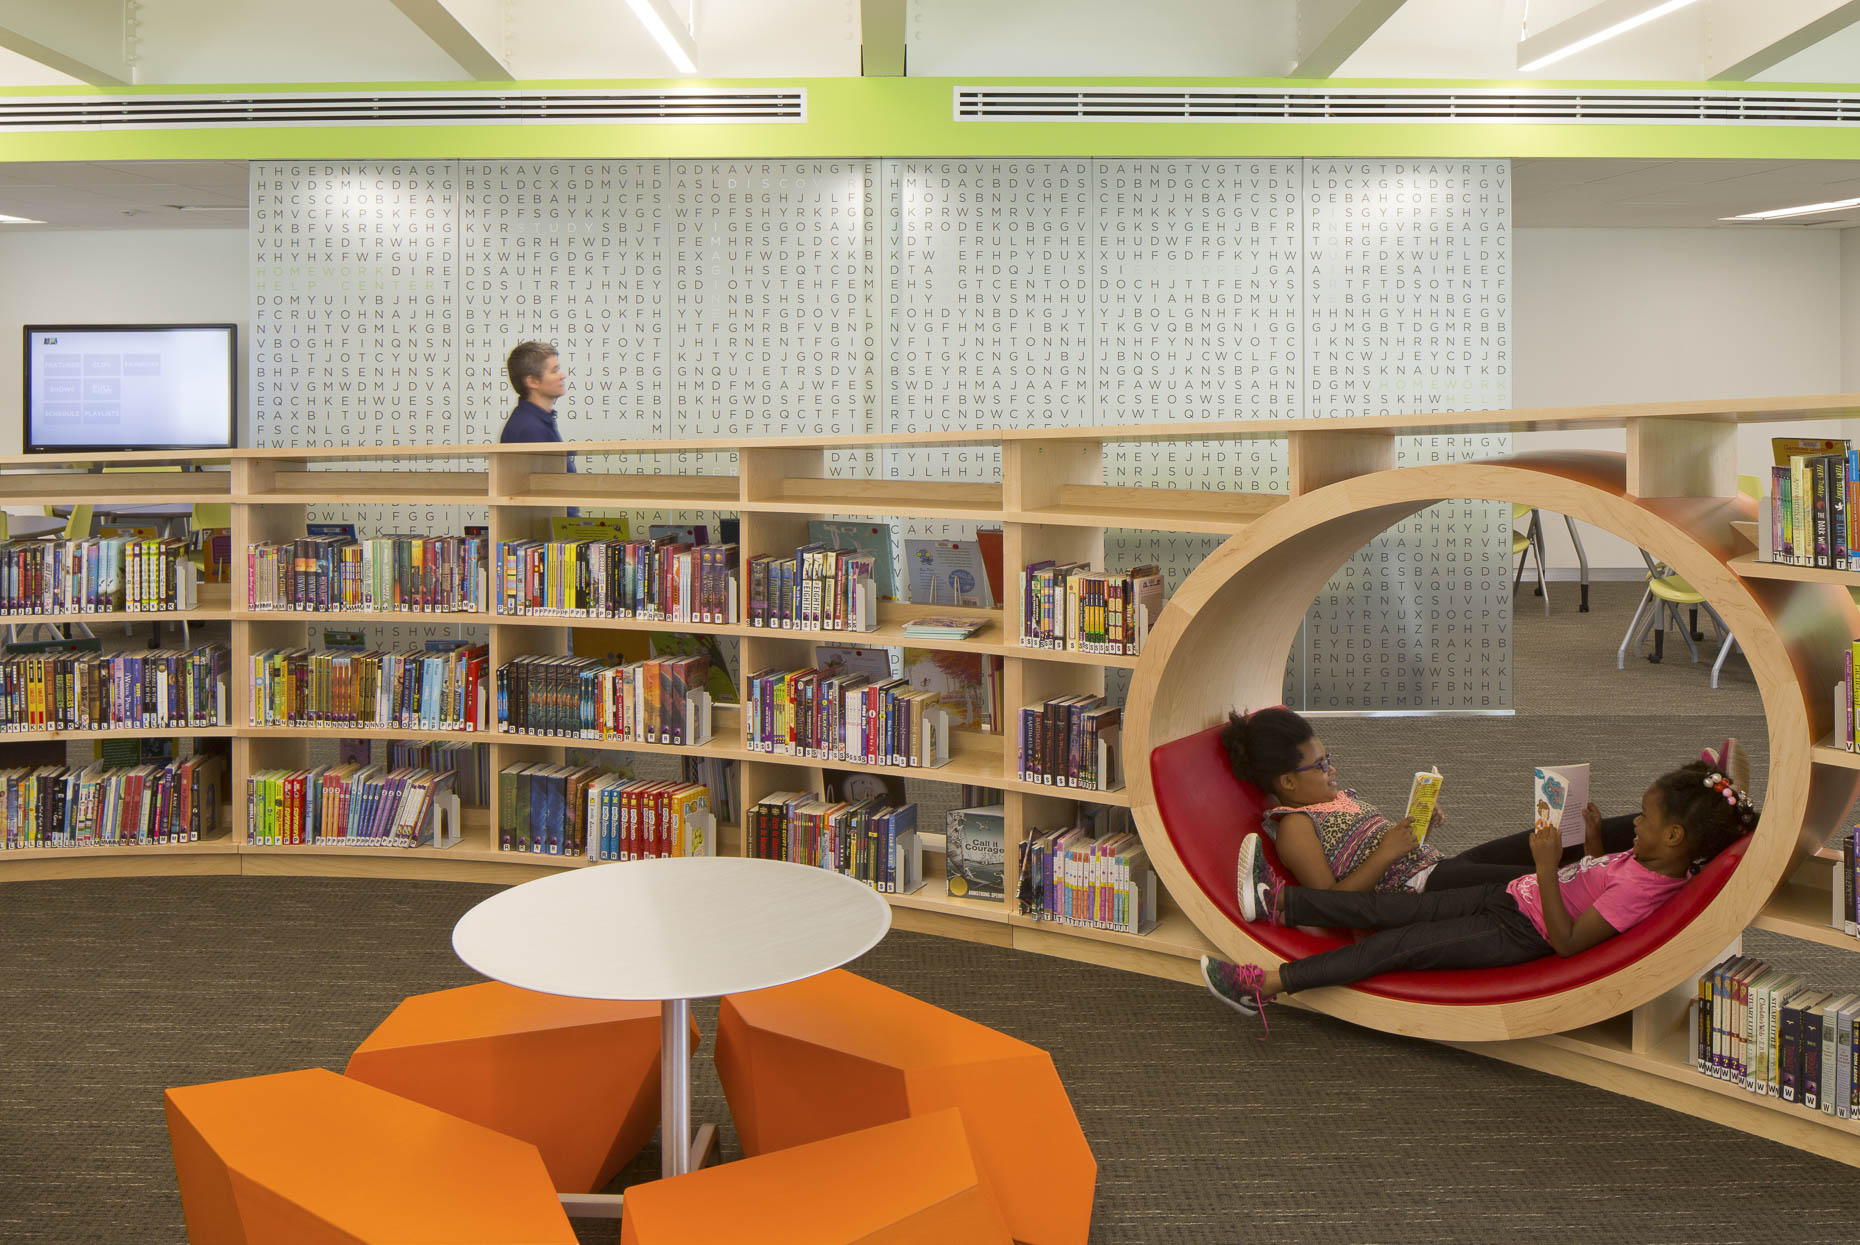 CML Whitehall Branch by JBAD photographed by Brad Feinknopf based in COlumbus, Ohio